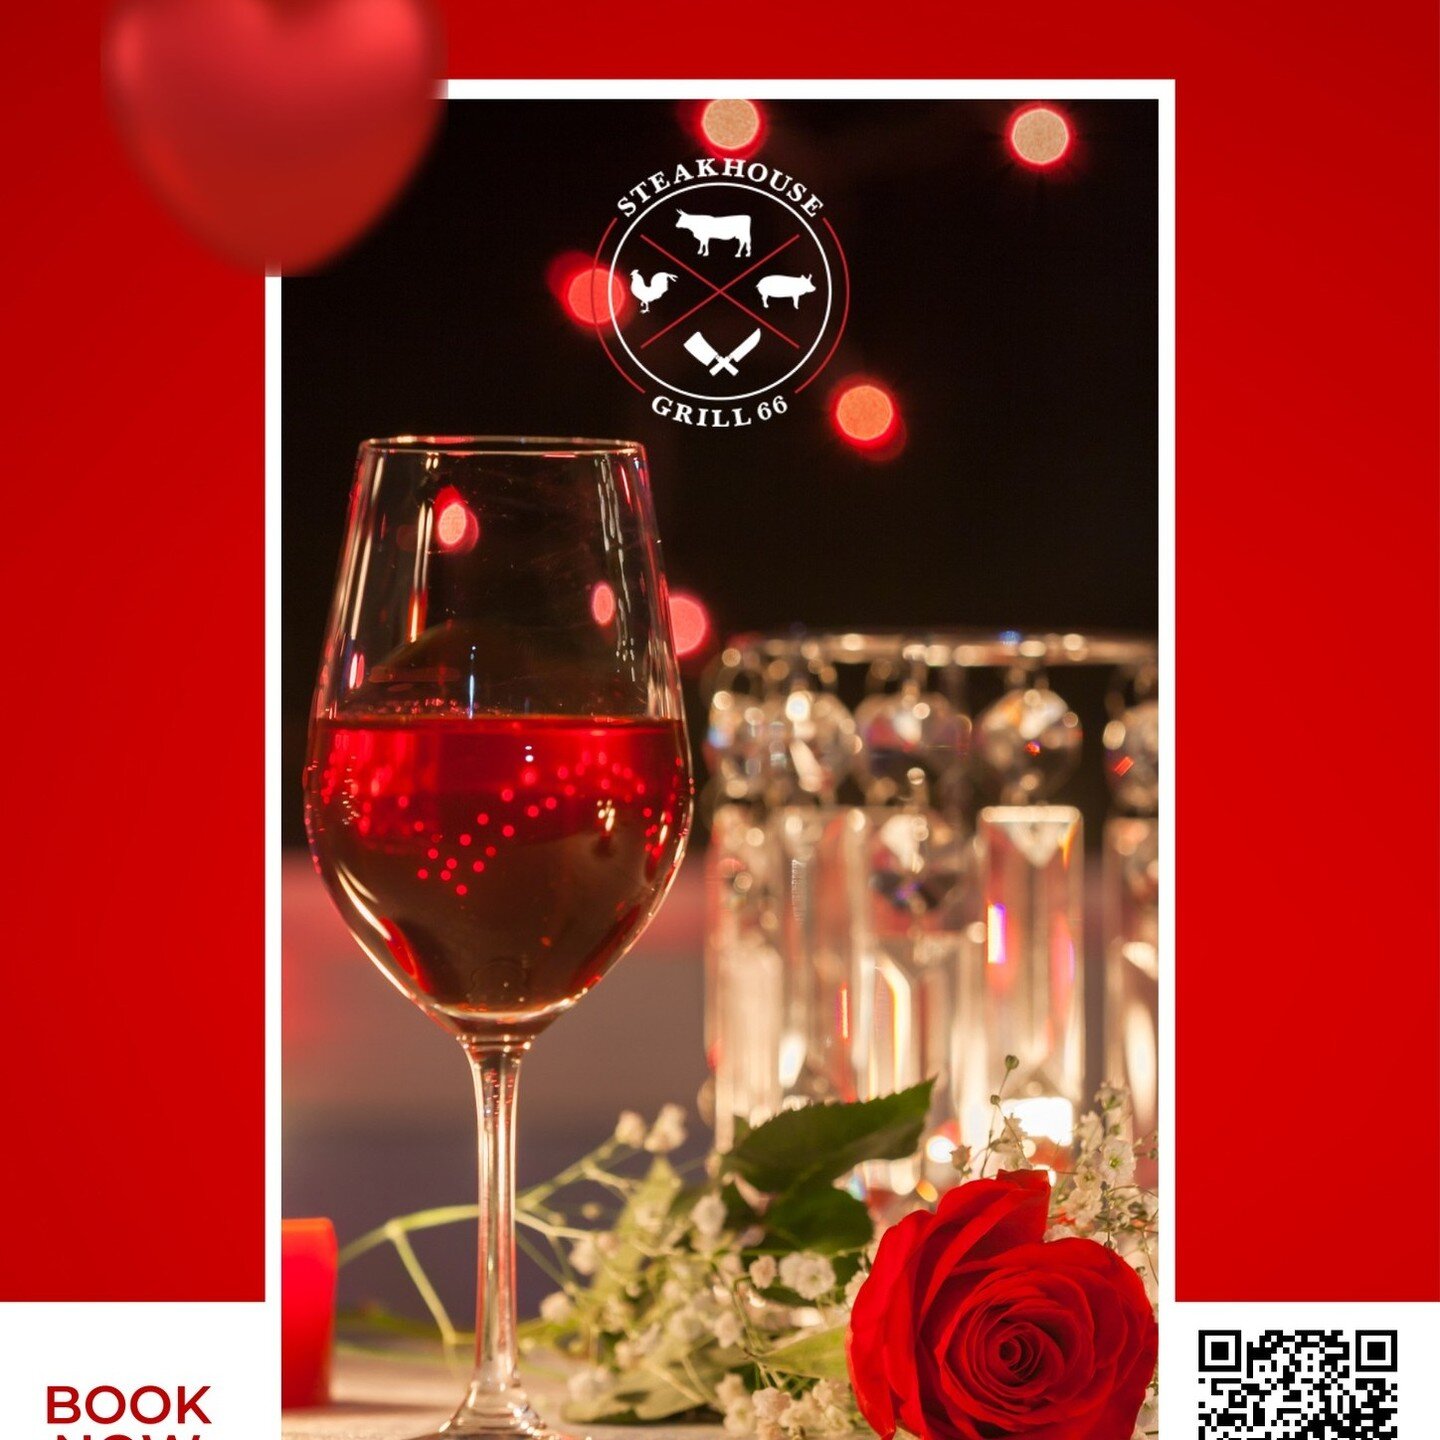 Steakhouse Grill 66 takes pride in its excellent location and food that perfectly sets the mood for that romantic dinner.

Make this valentines day flawless with Steakhouse Grill 66! ❤️

We also offer an extensive drinks menu from a variety of beers 